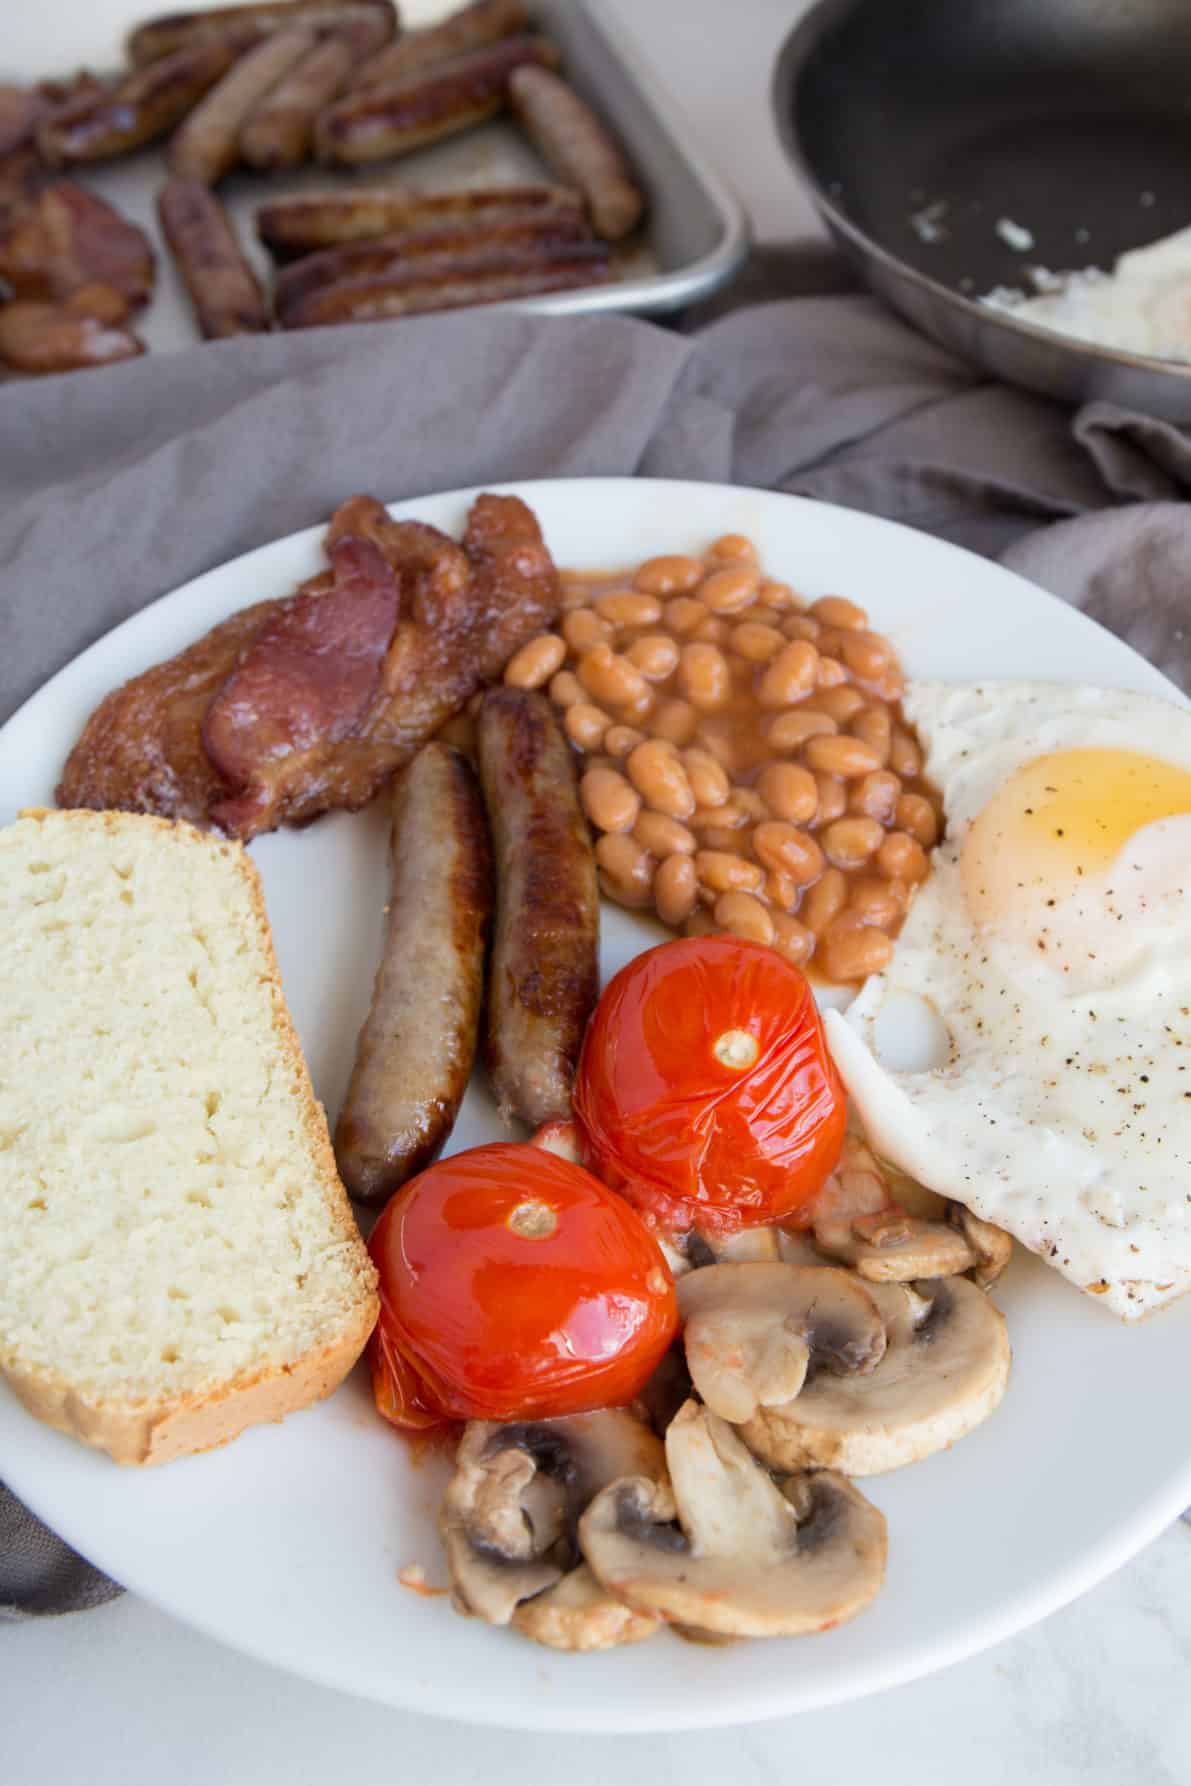 An Irish Breakfast laid out on a plate for serving.